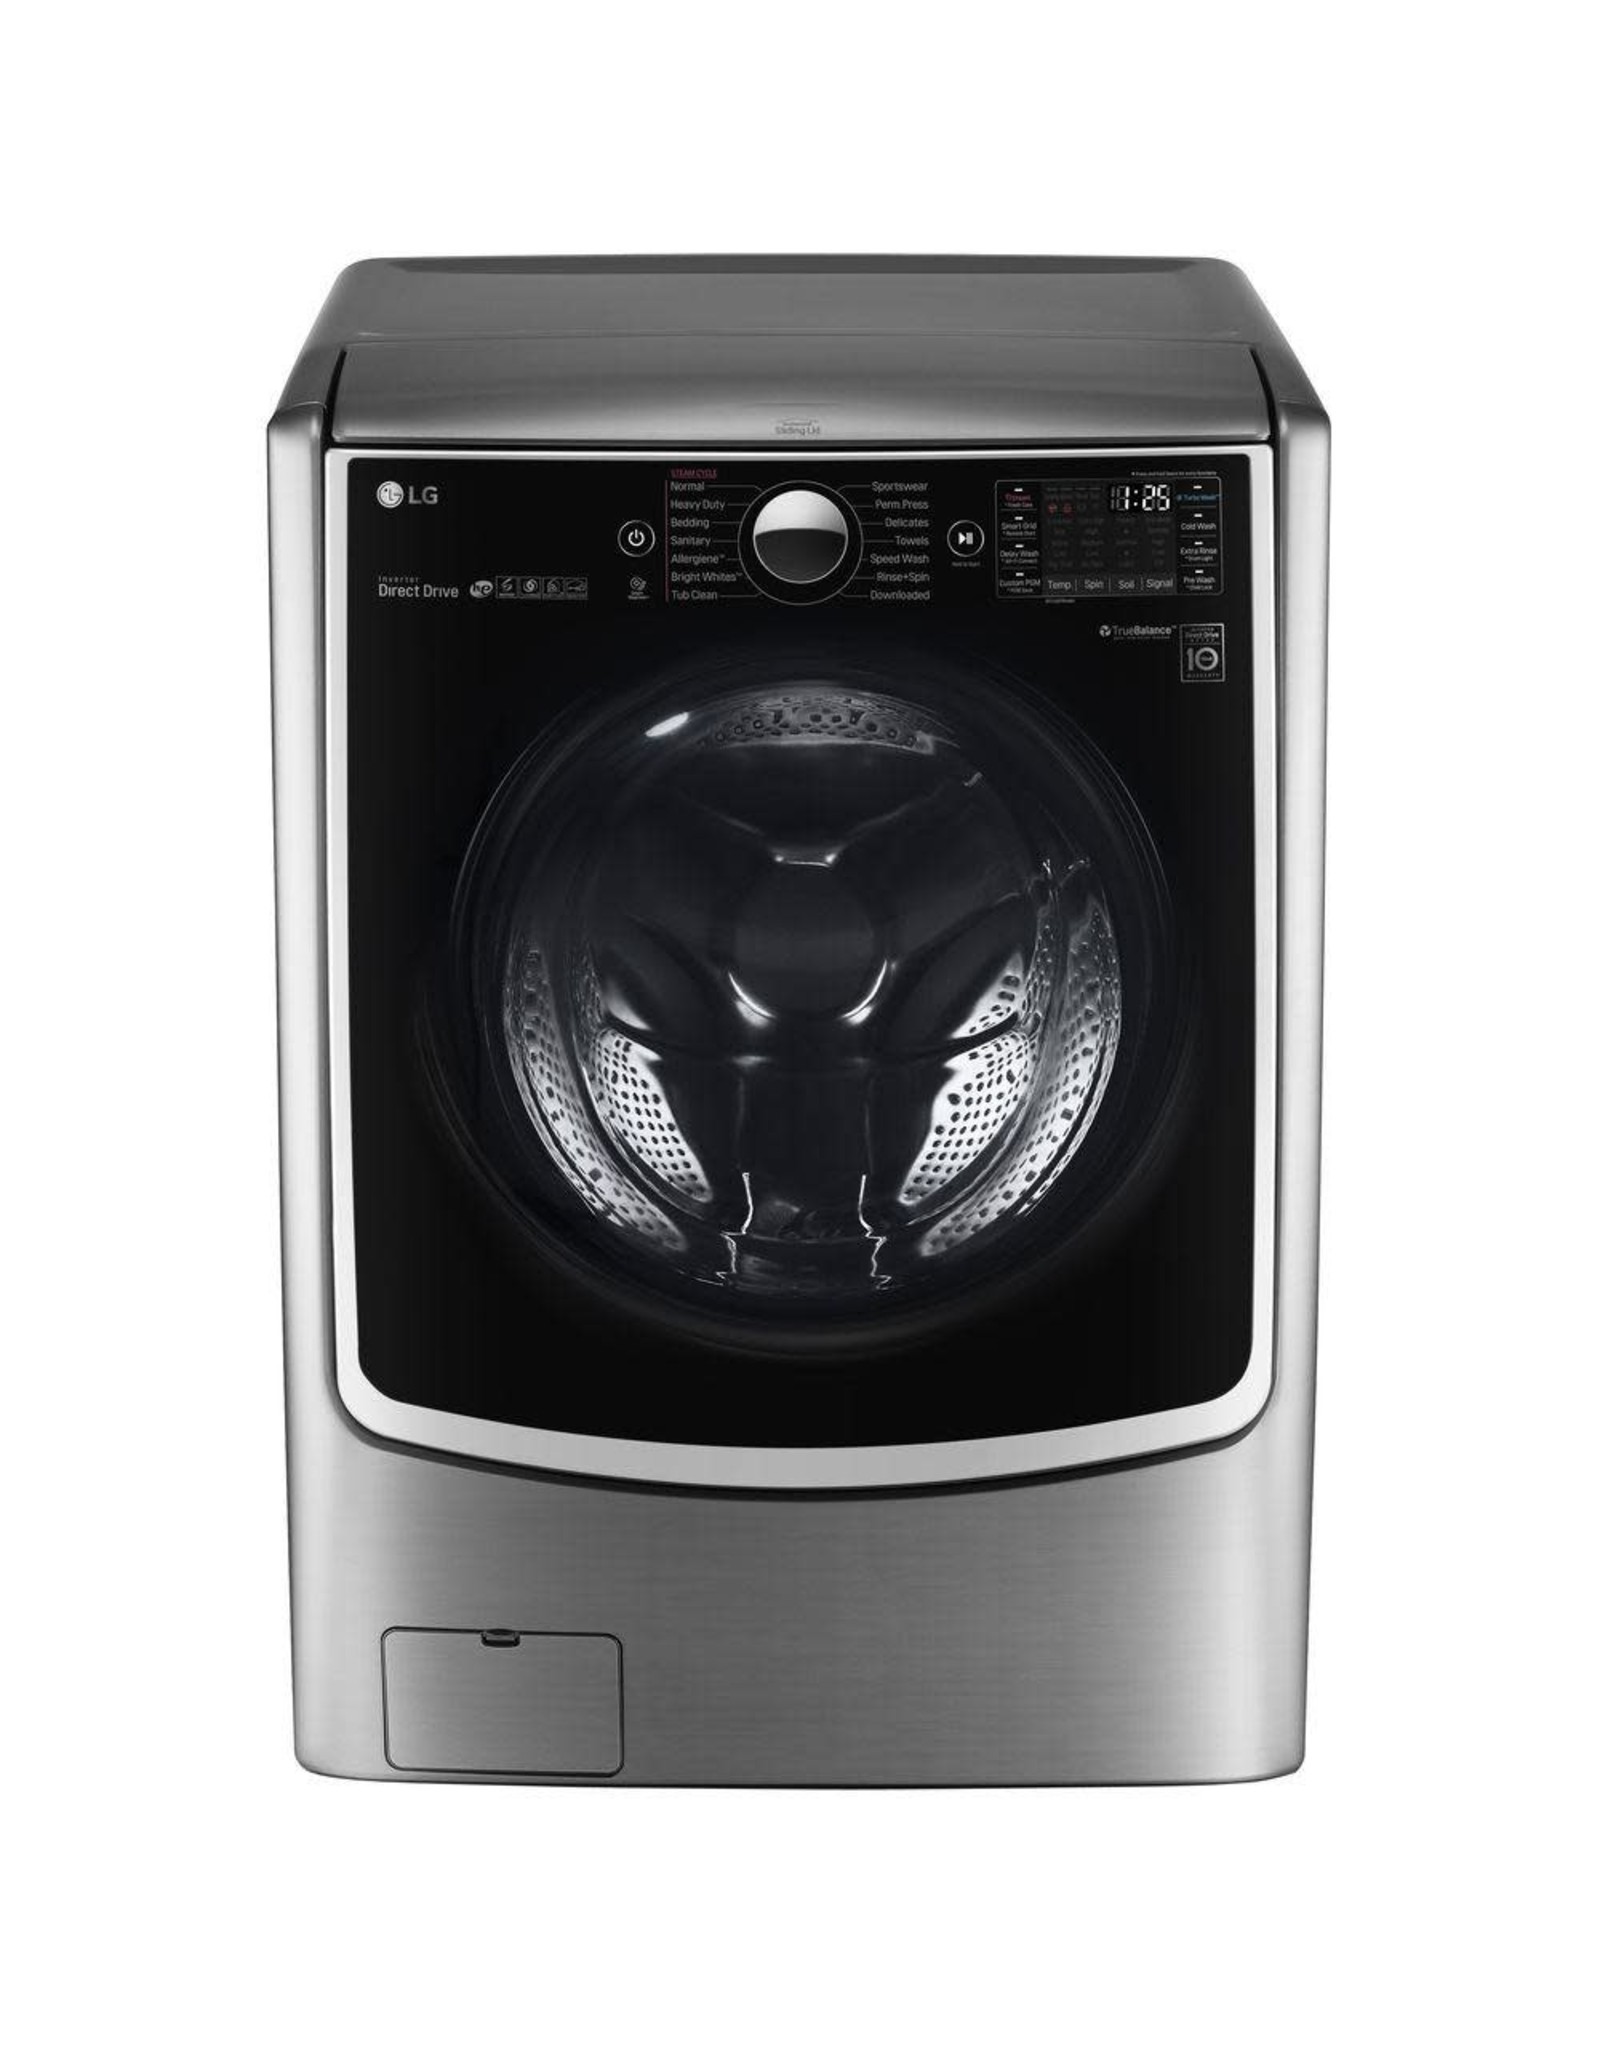 WM5000HVA 4.5 cu. ft. High-Efficiency Smart Front Load Washer with TurboWash and WiFi Enabled in Graphite Steel, ENERGY STAR